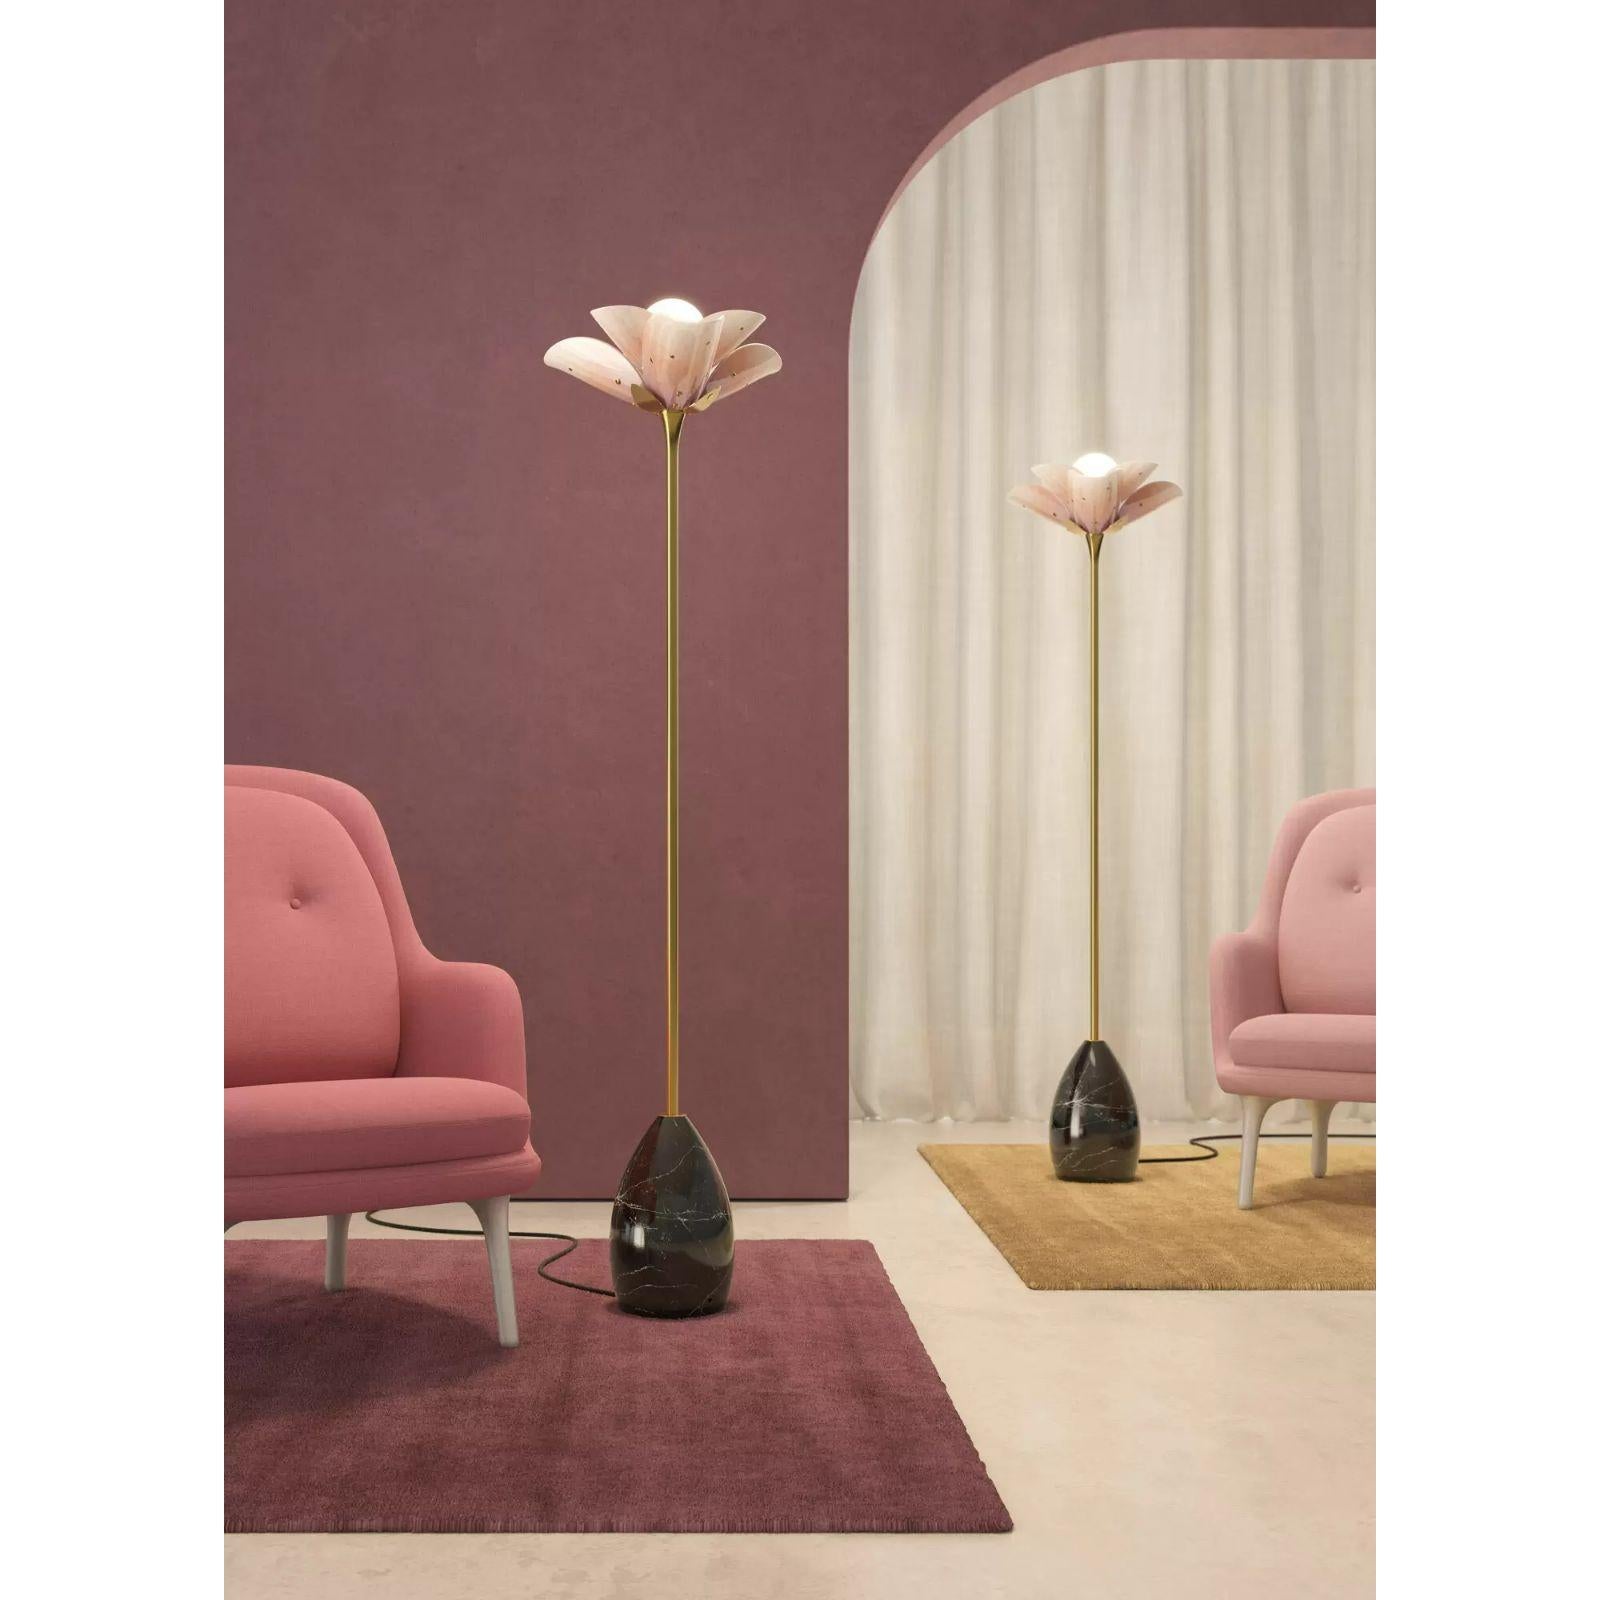 Blossom Pink and Golden Luster Floor Lamp (US)

Details: 
Insurance included: No
Height (in): 66.929
Width (in): 18.504
Length (in): 18.504
Finished: Gloss and gold lustre
Wireless: No
Porcelain Type: Gloss and gold lustre
Sculptor: Dept. Design and